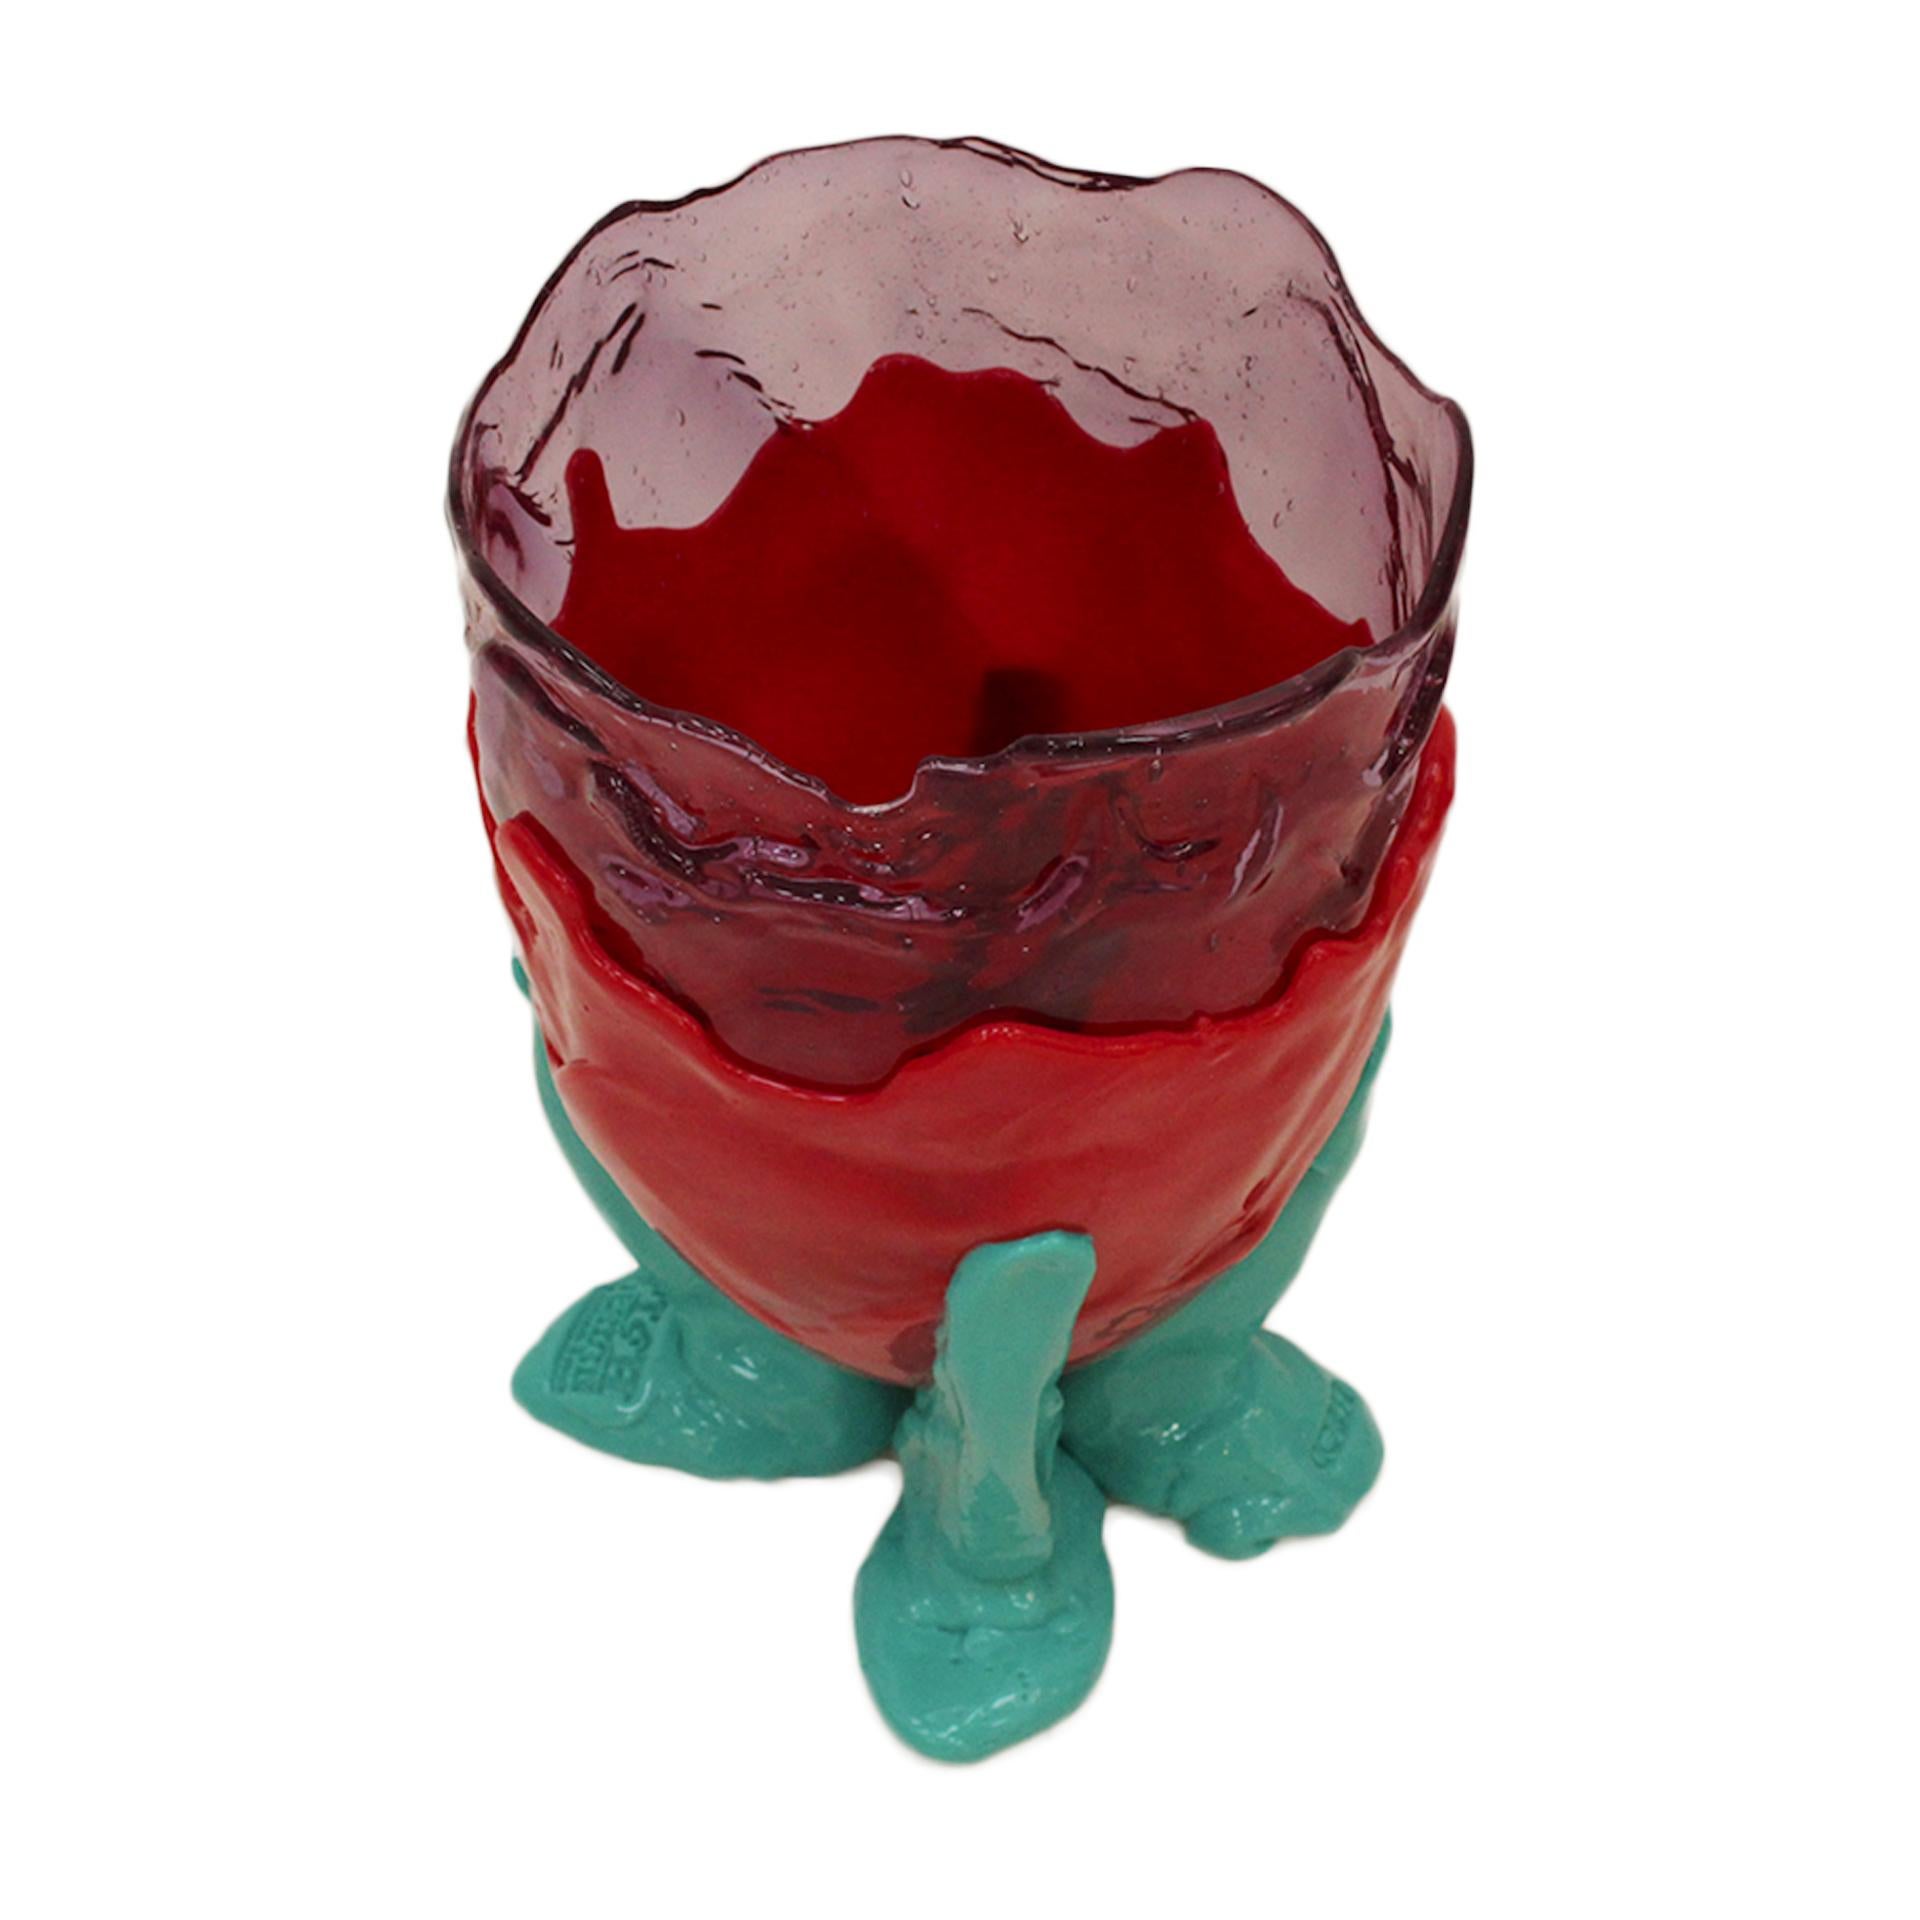 Contemporary Italian Arty Vase Designed By Gaetano Pesce and Made of Colored Resin For Sale